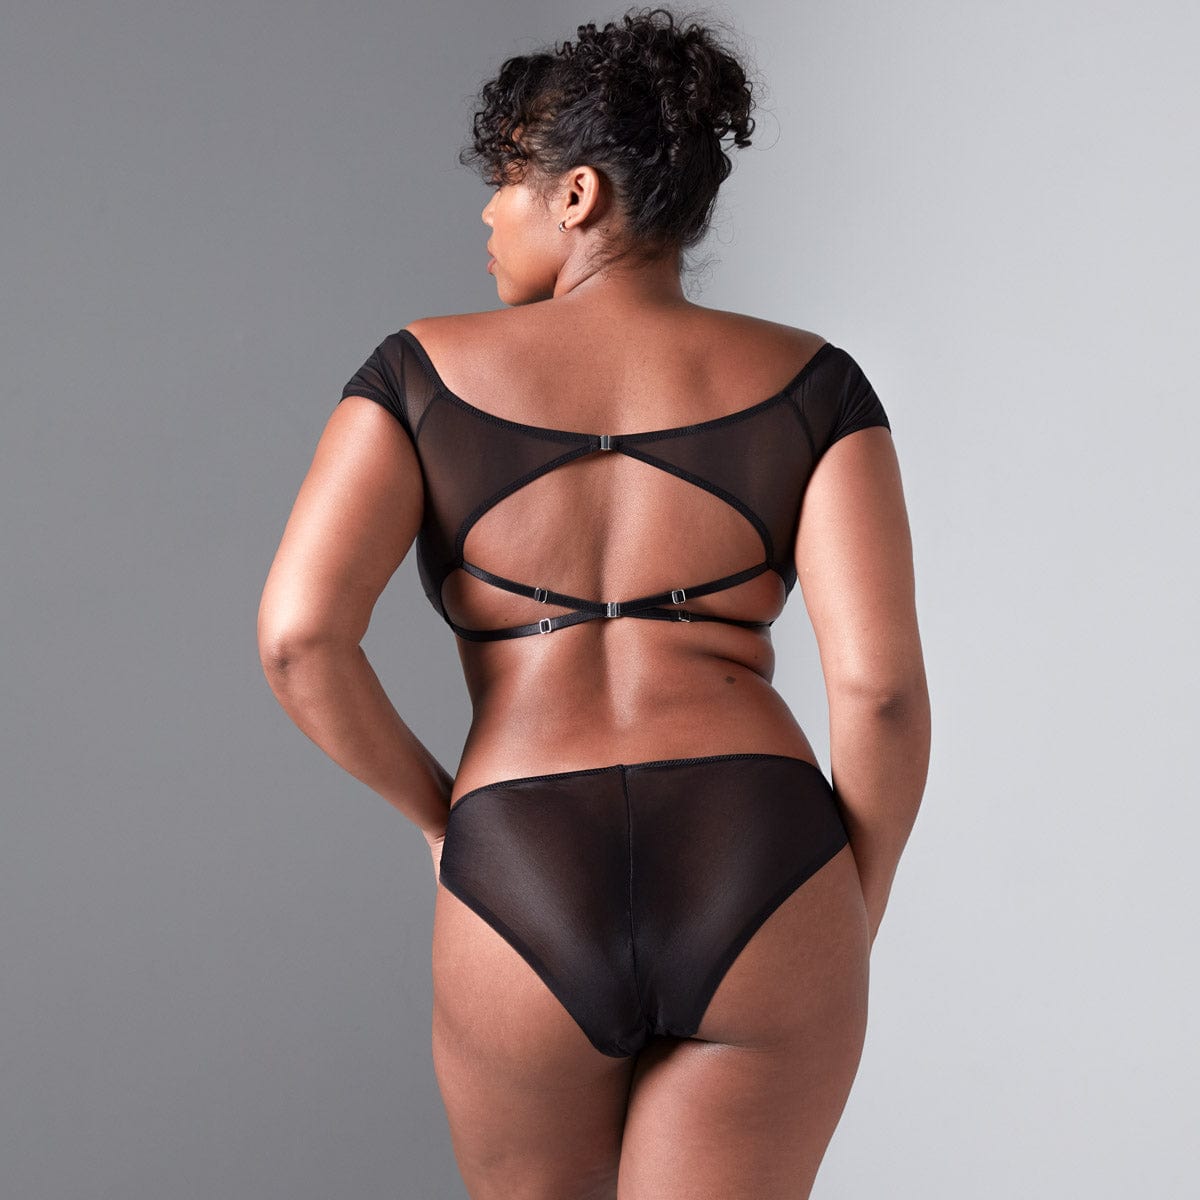 Bodysuits  Thistle and Spire Lingerie – Tag